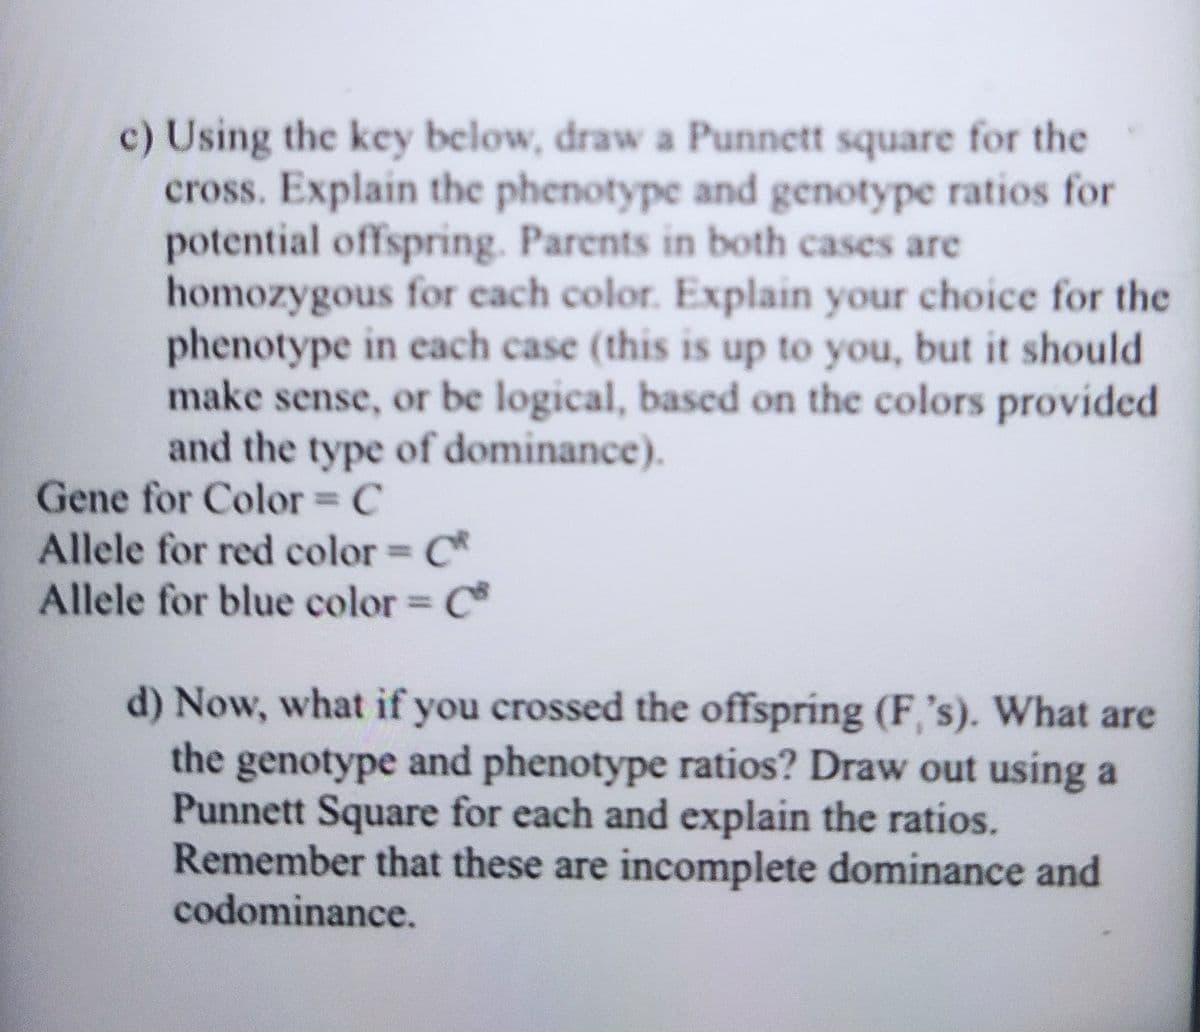 c) Using the key below, draw a Punnett square for the
cross. Explain the phenotype and genotype ratios for
potential offspring. Parents in both cases are
homozygous for each color. Explain your choice for the
phenotype in each case (this is up to you, but it should
make sense, or be logical, based on the colors provided
and the type of dominance).
Gene for Color C
Allele for red color C*
Allele for blue color C
d) Now, what if you crossed the offspring (F,'s). What are
the genotype and phenotype ratios? Draw out using a
Punnett Square for each and explain the ratios.
Remember that these are incomplete dominance and
codominance.
